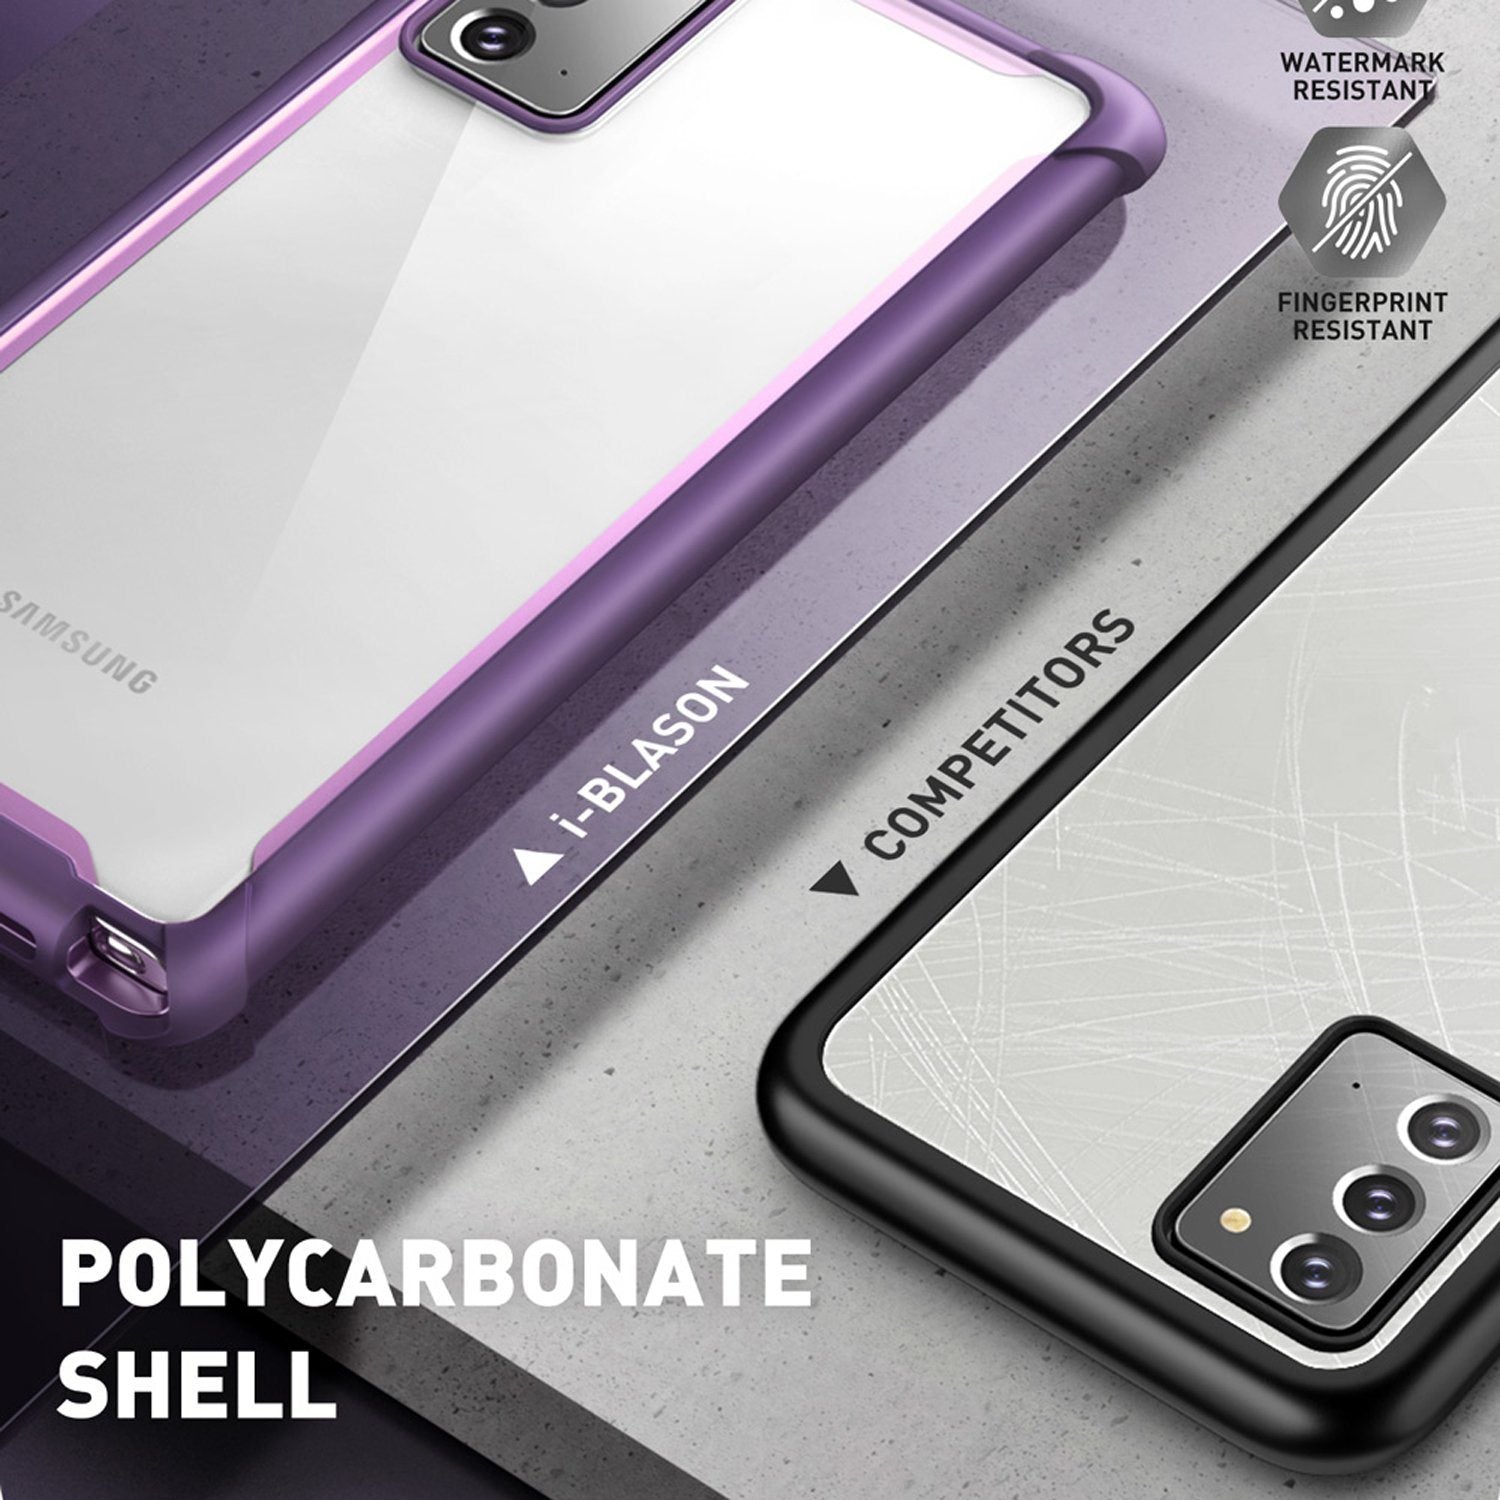 i-Blason Ares Series Clear Case for Samsung Galaxy Note 20(Without Screen Protector), Purple Default i-Blason 